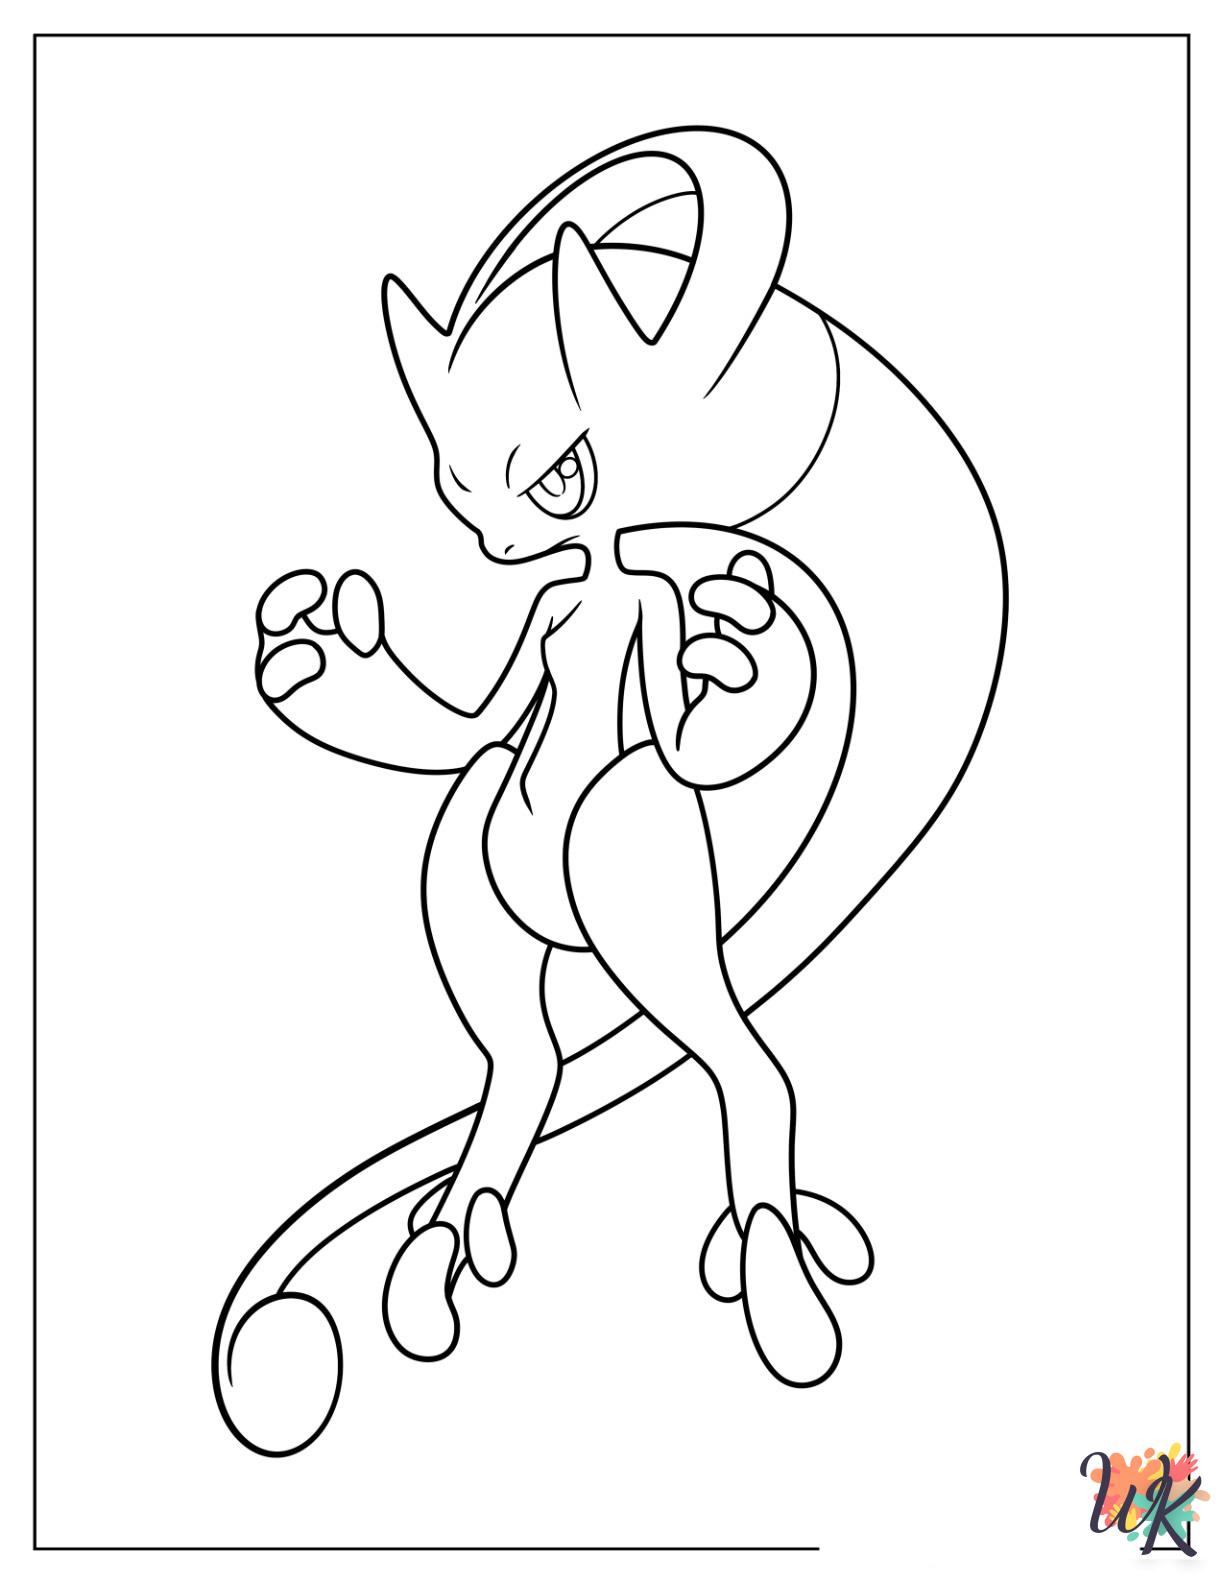 printable Legendary Pokemon coloring pages for adults